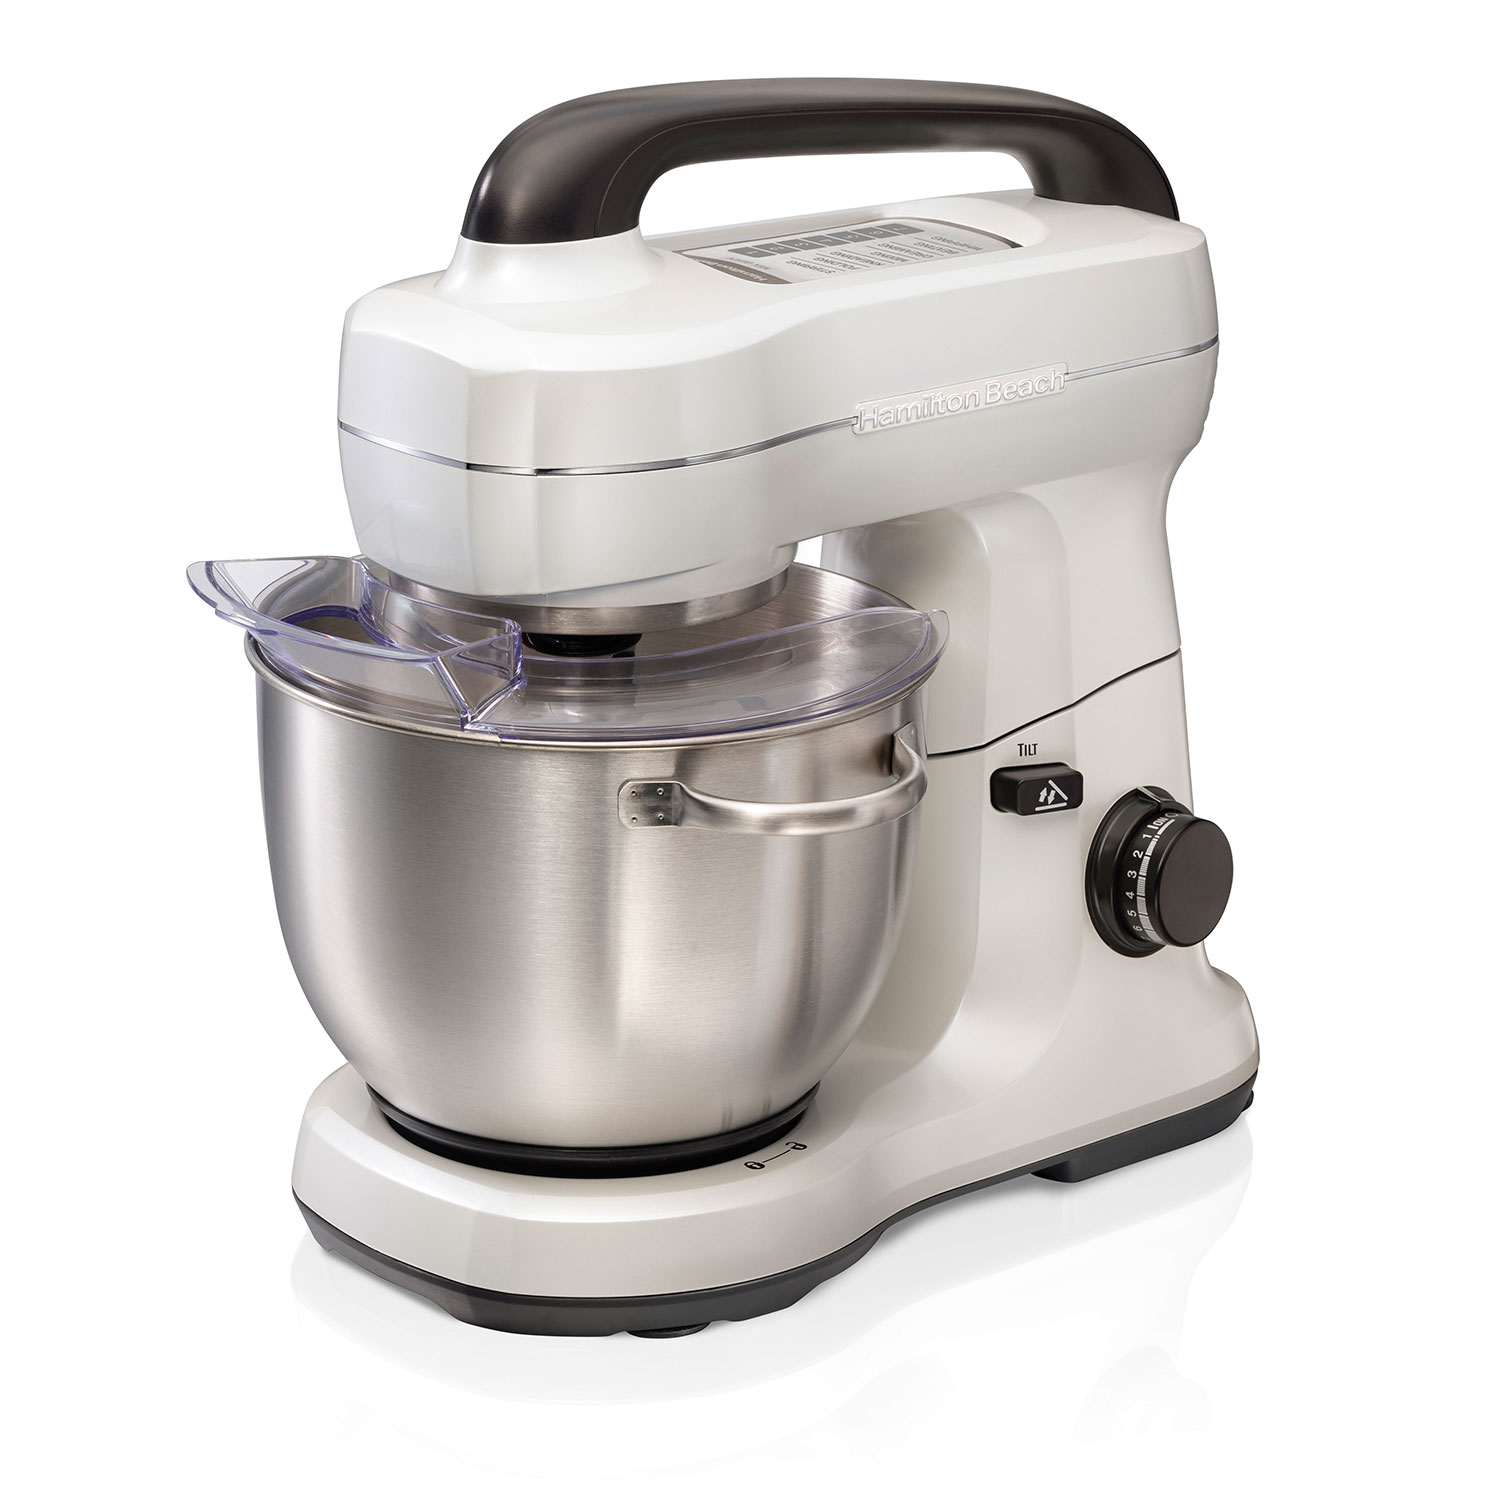 7 Speed Stand Mixer, 4 Quart, Pearly White (63398)